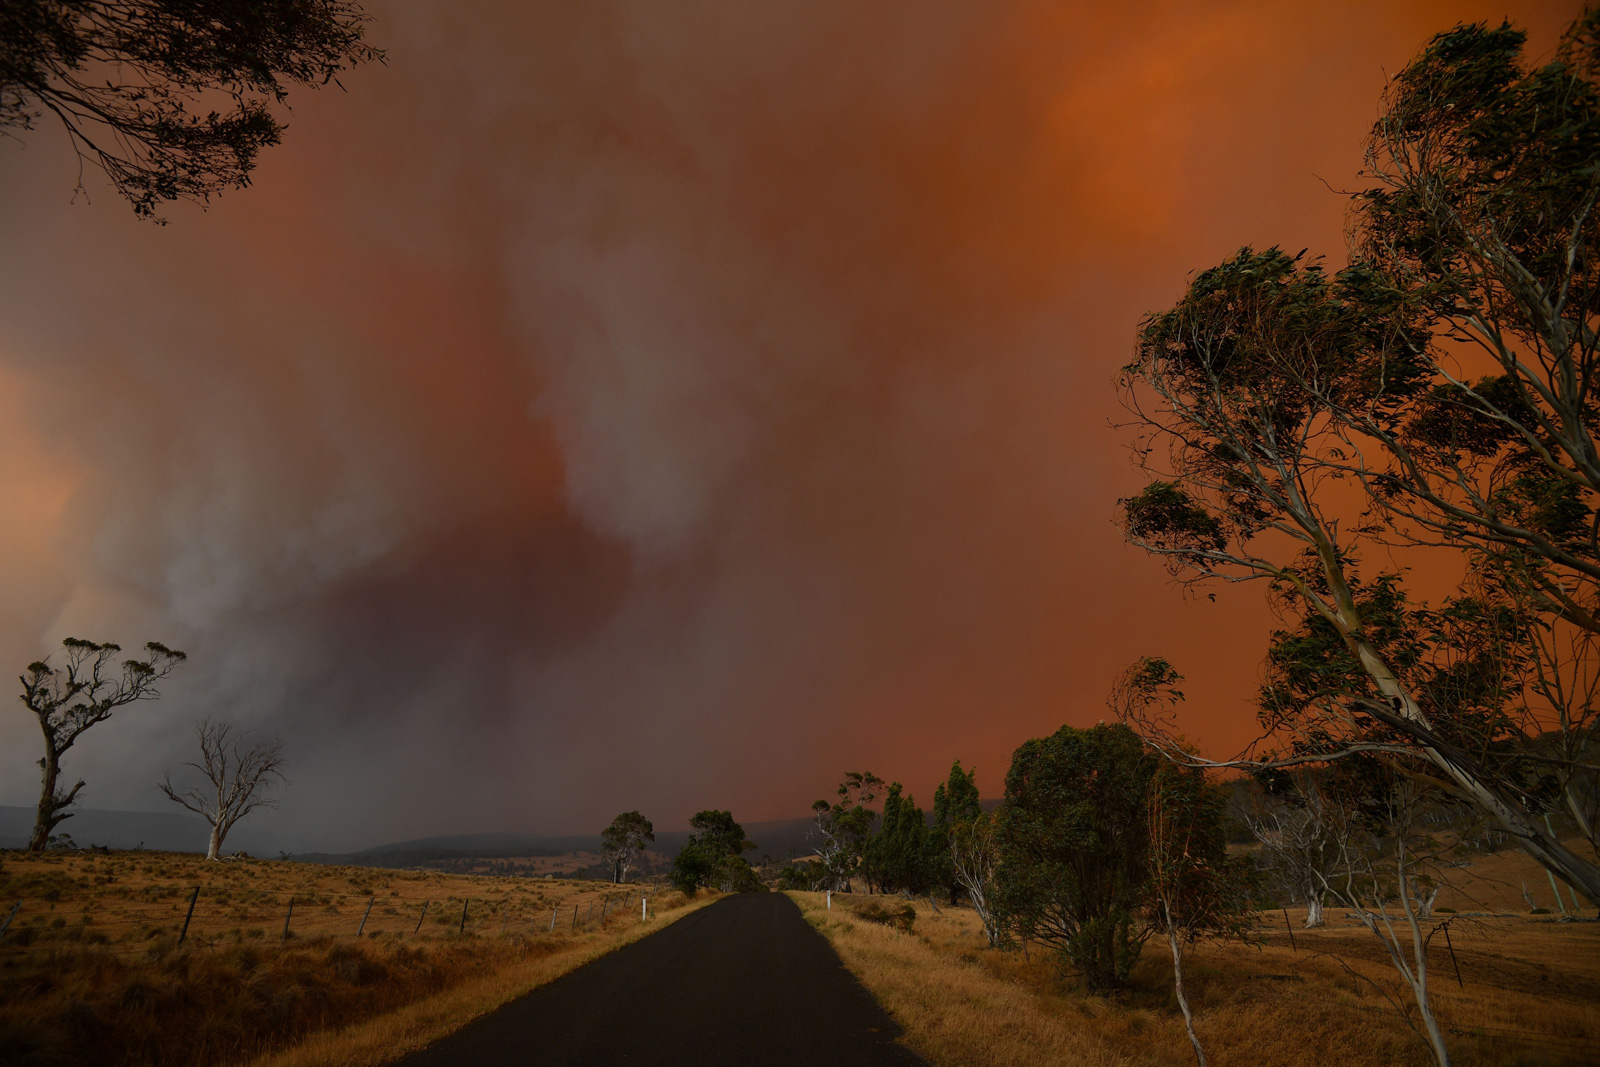 Australia: The Fires and Our Future